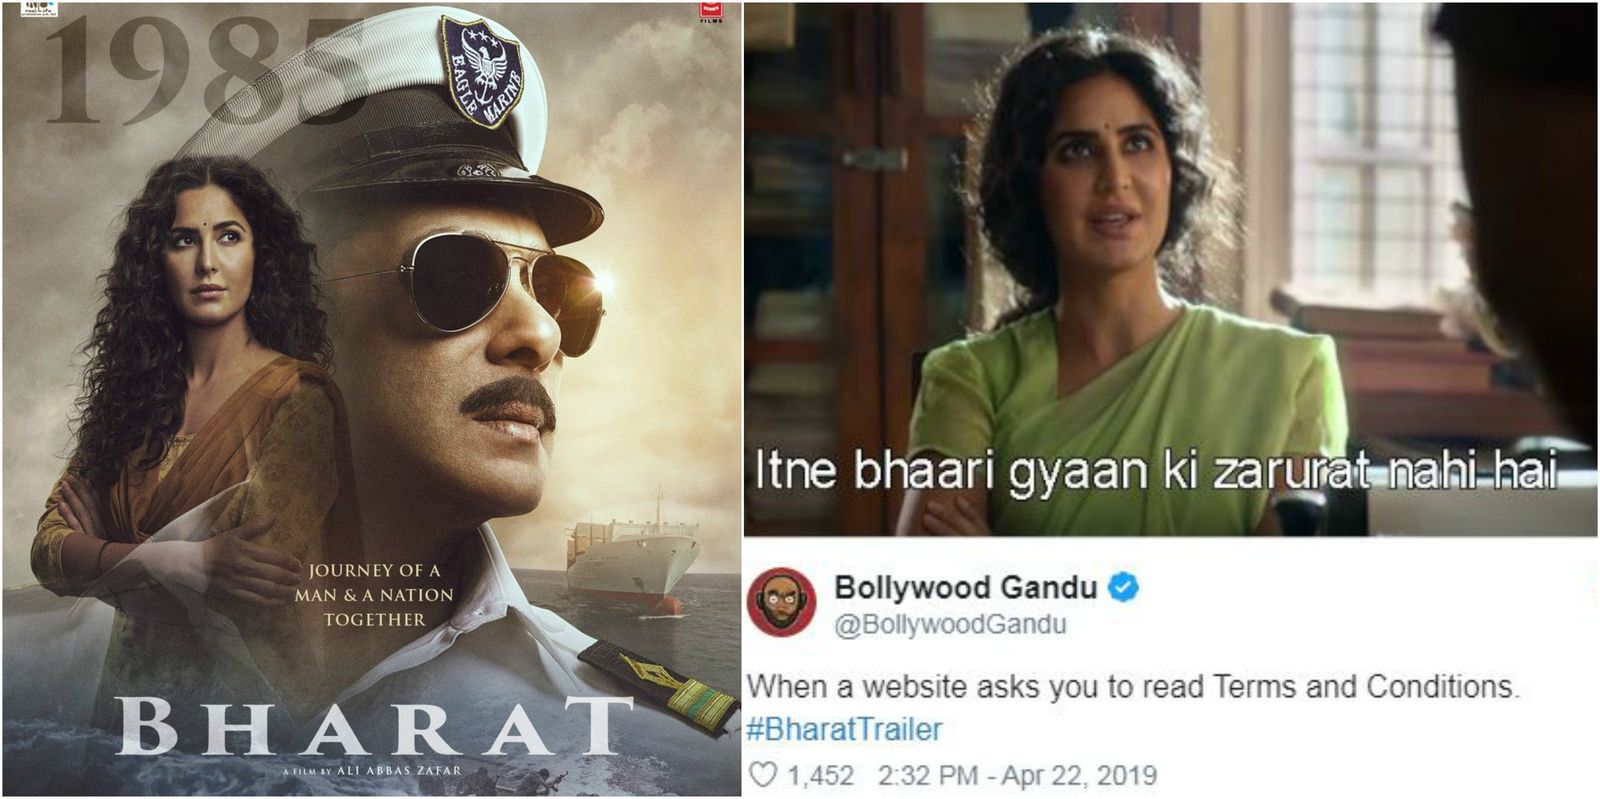 Katrina Kaif Dialogue From Bharat Trailer Is All Memesters Can Obssess About